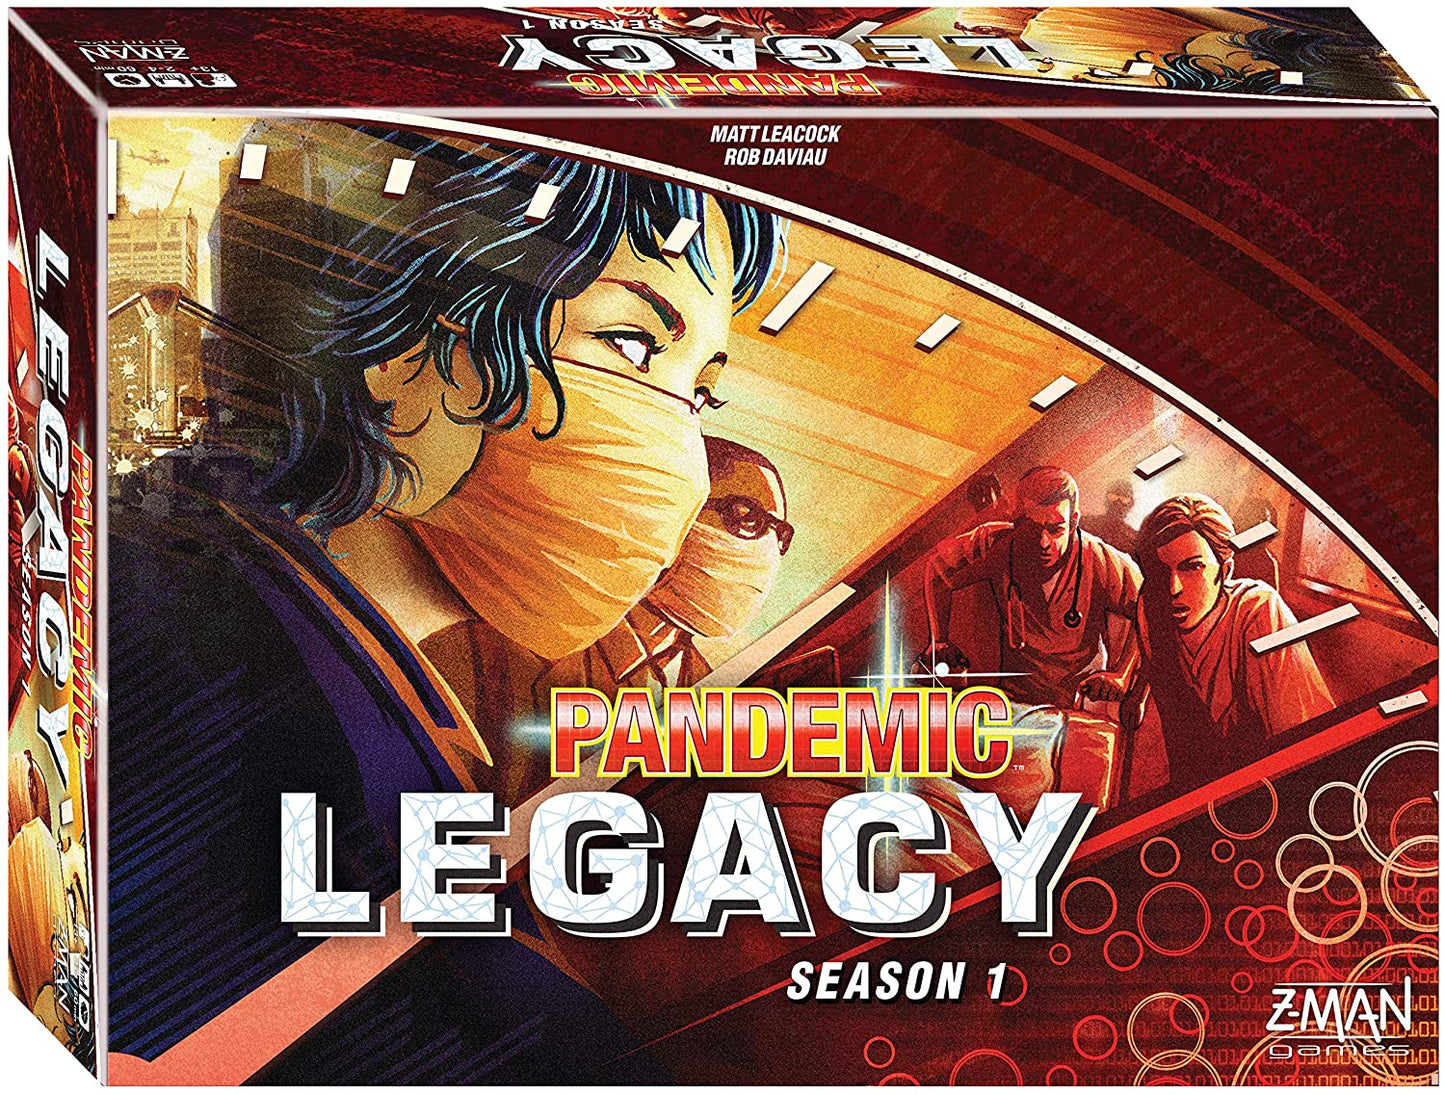 (BSG Certified USED) Pandemic: Legacy Season 1 (Red Edition)